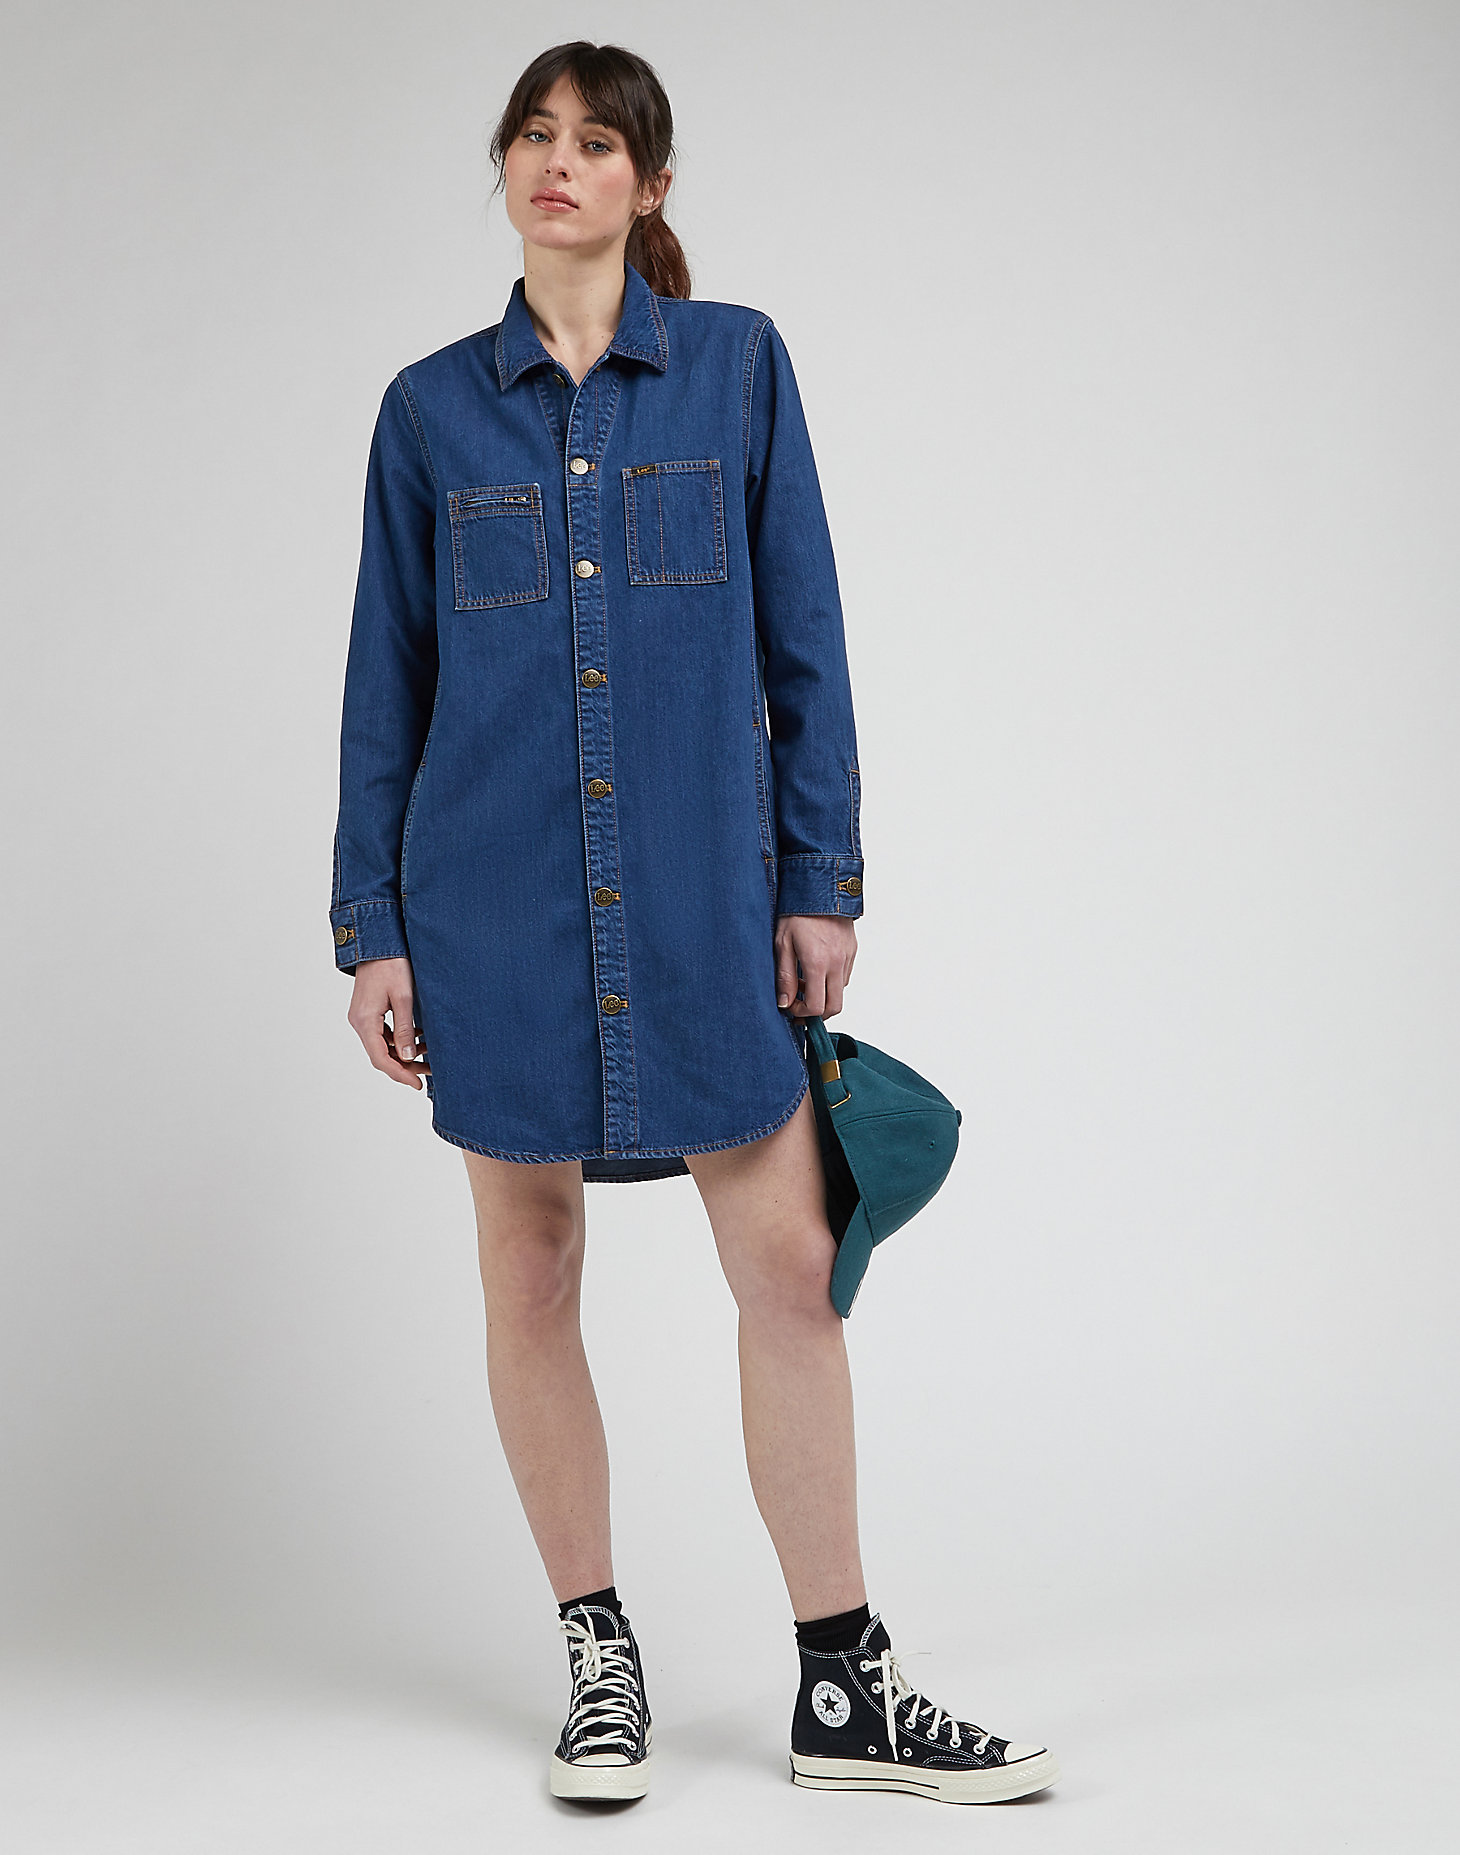 Unionall Shirt Dress in Into The Moon alternative view 2